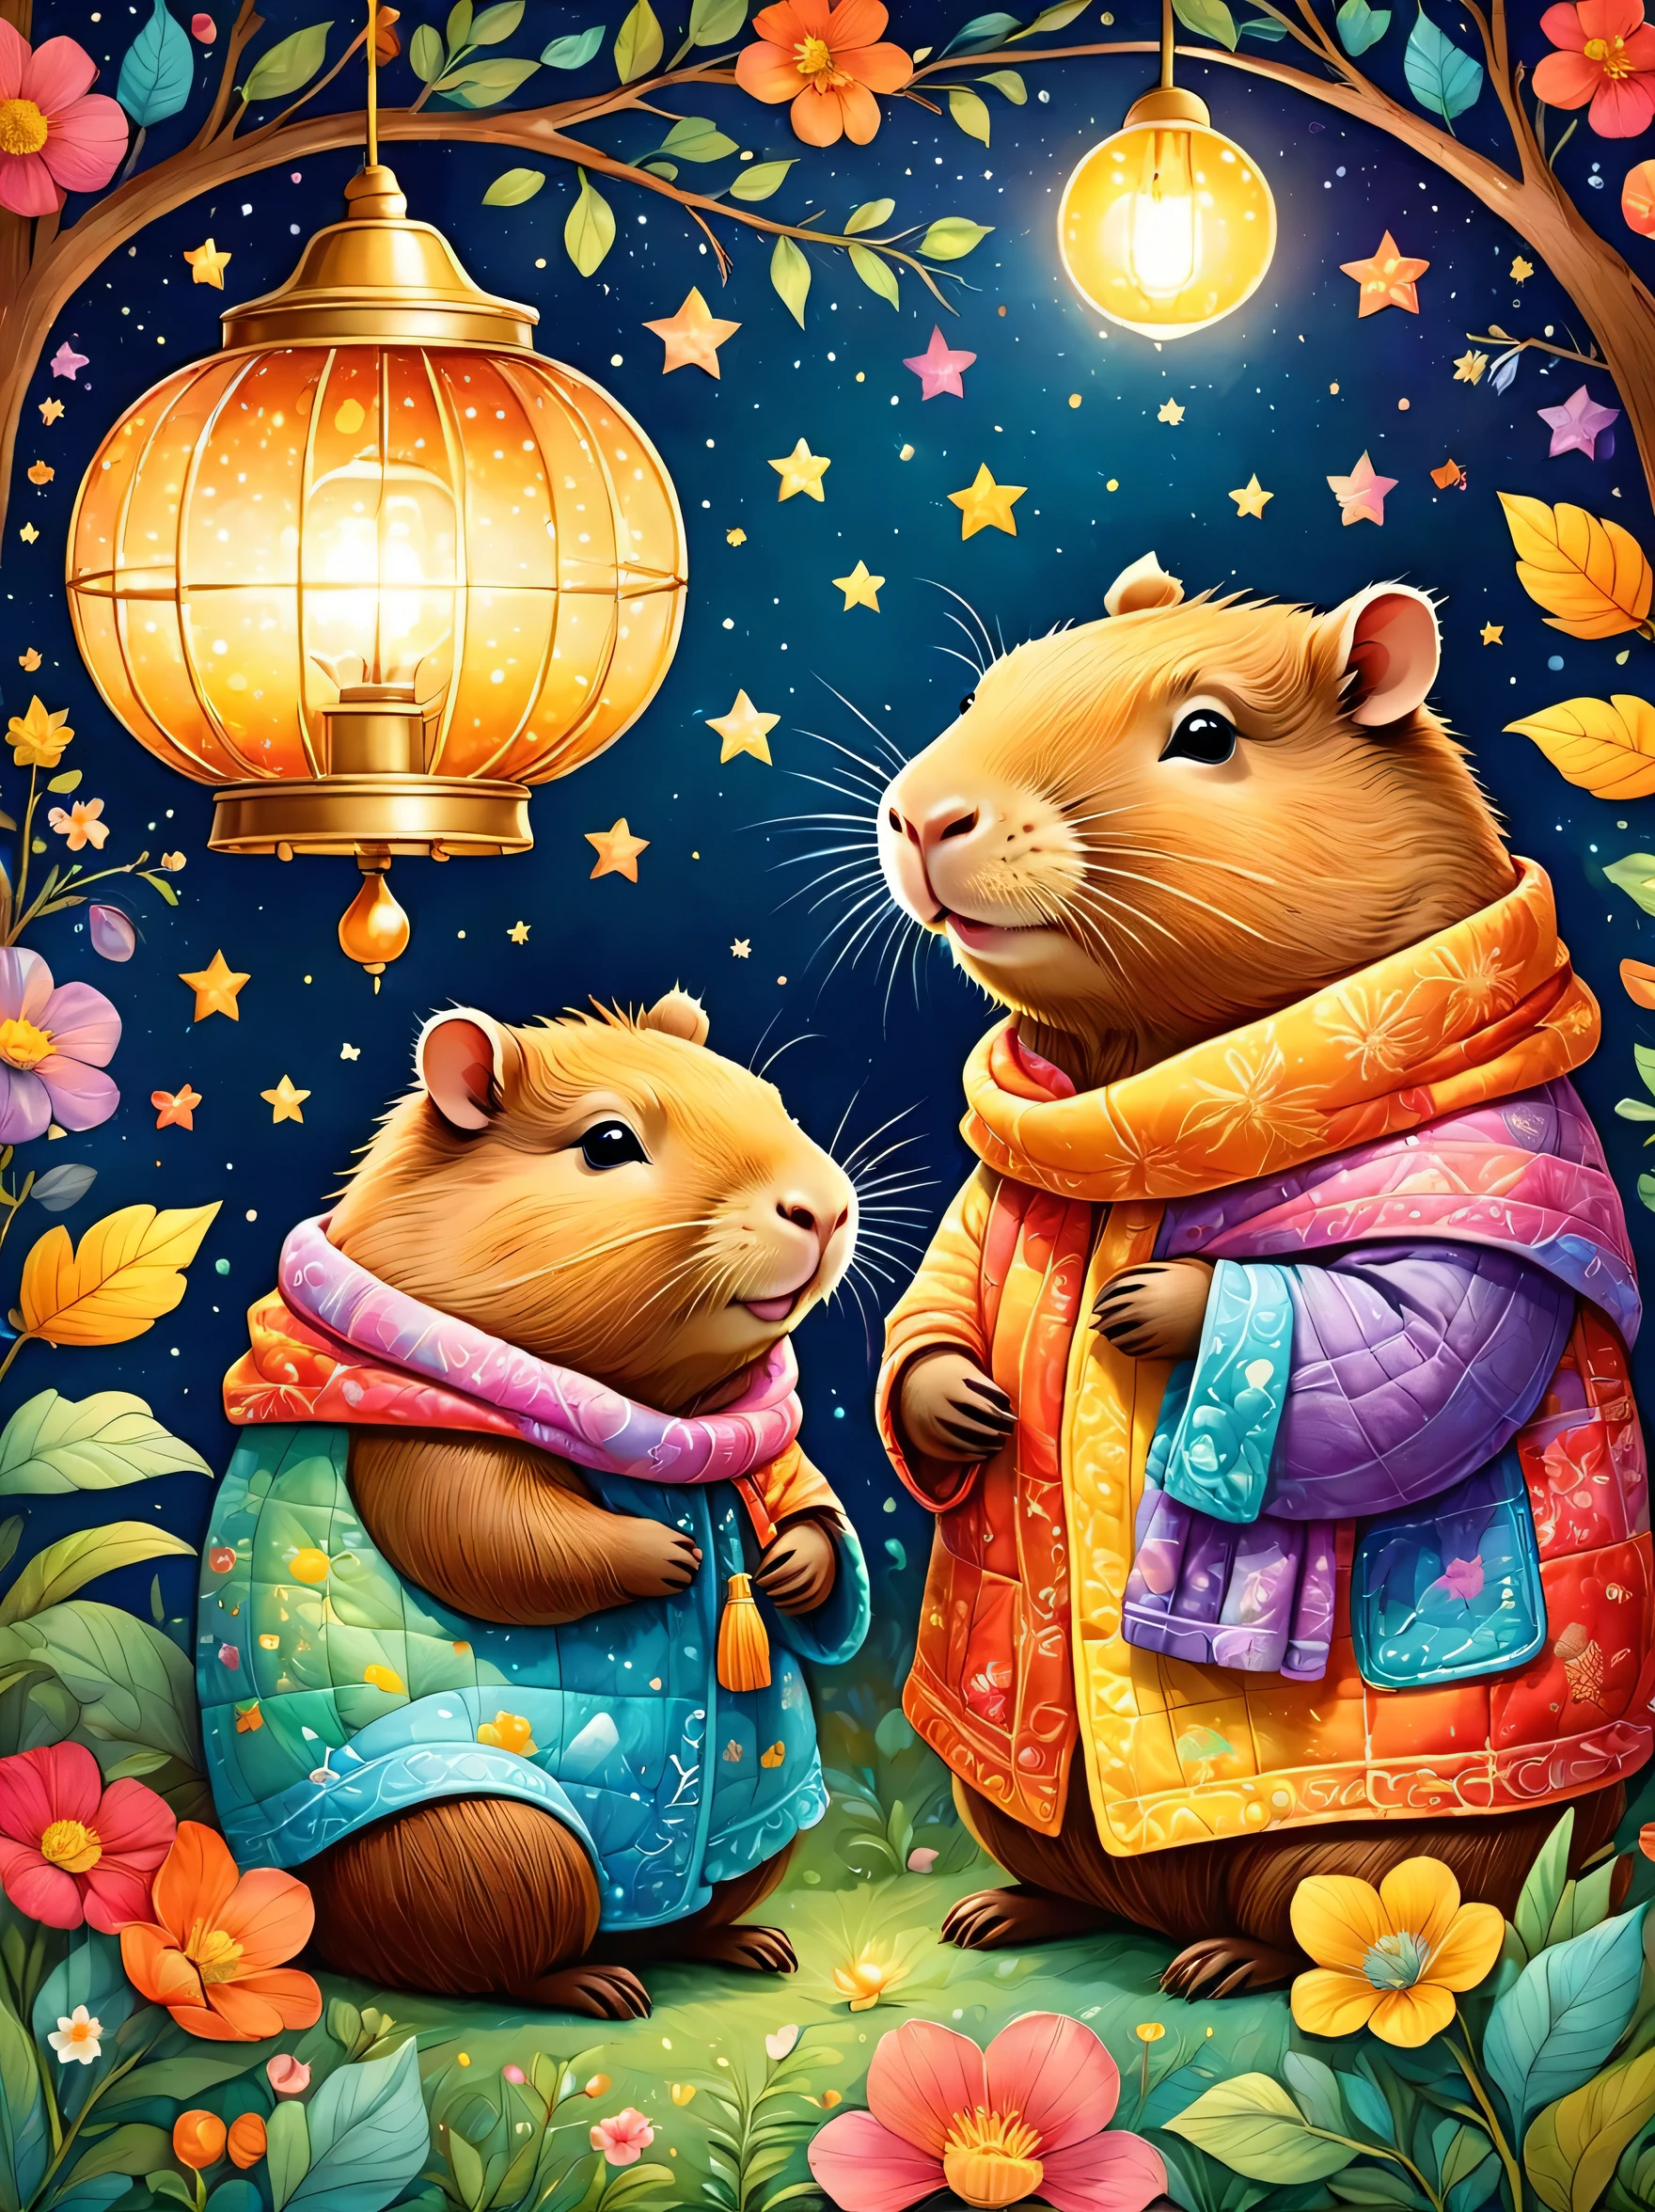 cuteAn illustrationカピバラの家,Capybara family:animal:hibernating:cute:Nestle:sleep:comfortable and warm:looks happy,An illustration,pop,colorful,draw with thick lines,color,dim,Lamp light,The hibernating Capybara family is asleep.:dream happy dreams,The house is warm and full of happiness,,colorful,Fancy,Fantasy,patchwork:quilt,detailed details,fluffy,Randolph Caldecott Style,Rich colors,Cast colorful spells,concentrated,The best configuration,Perfect composition,accent,An illustration that children will enjoy,For kids,feel warm,wonderful like a dream,Happy and fun looking capybaras,Little,Cast colorful spells,Sparkling,Anatomically correct,scarf,pajamas